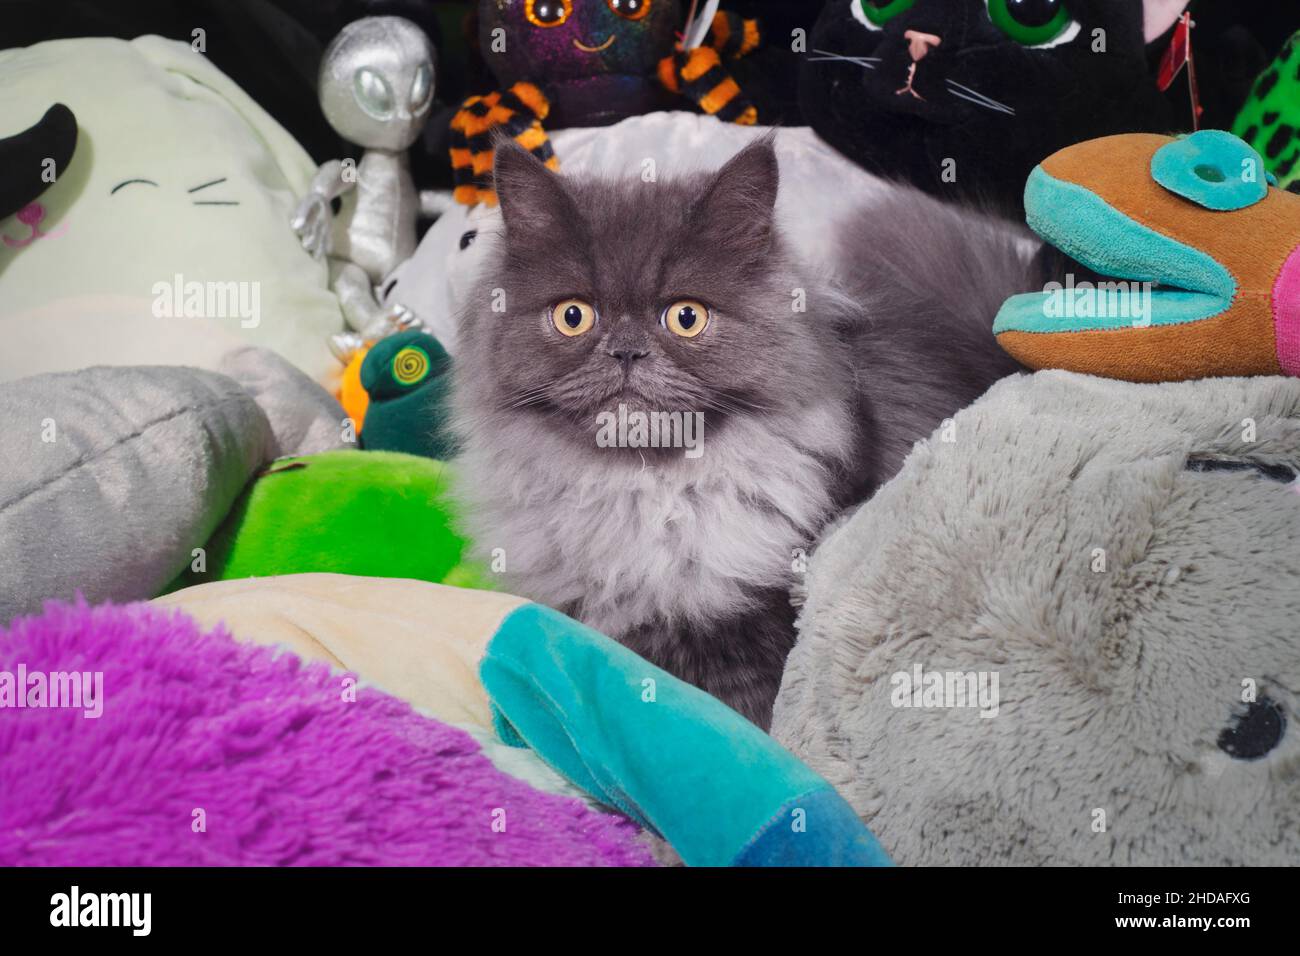 Cute fluffy grey cat sitting in a pile of stuffed animals. Stock Photo